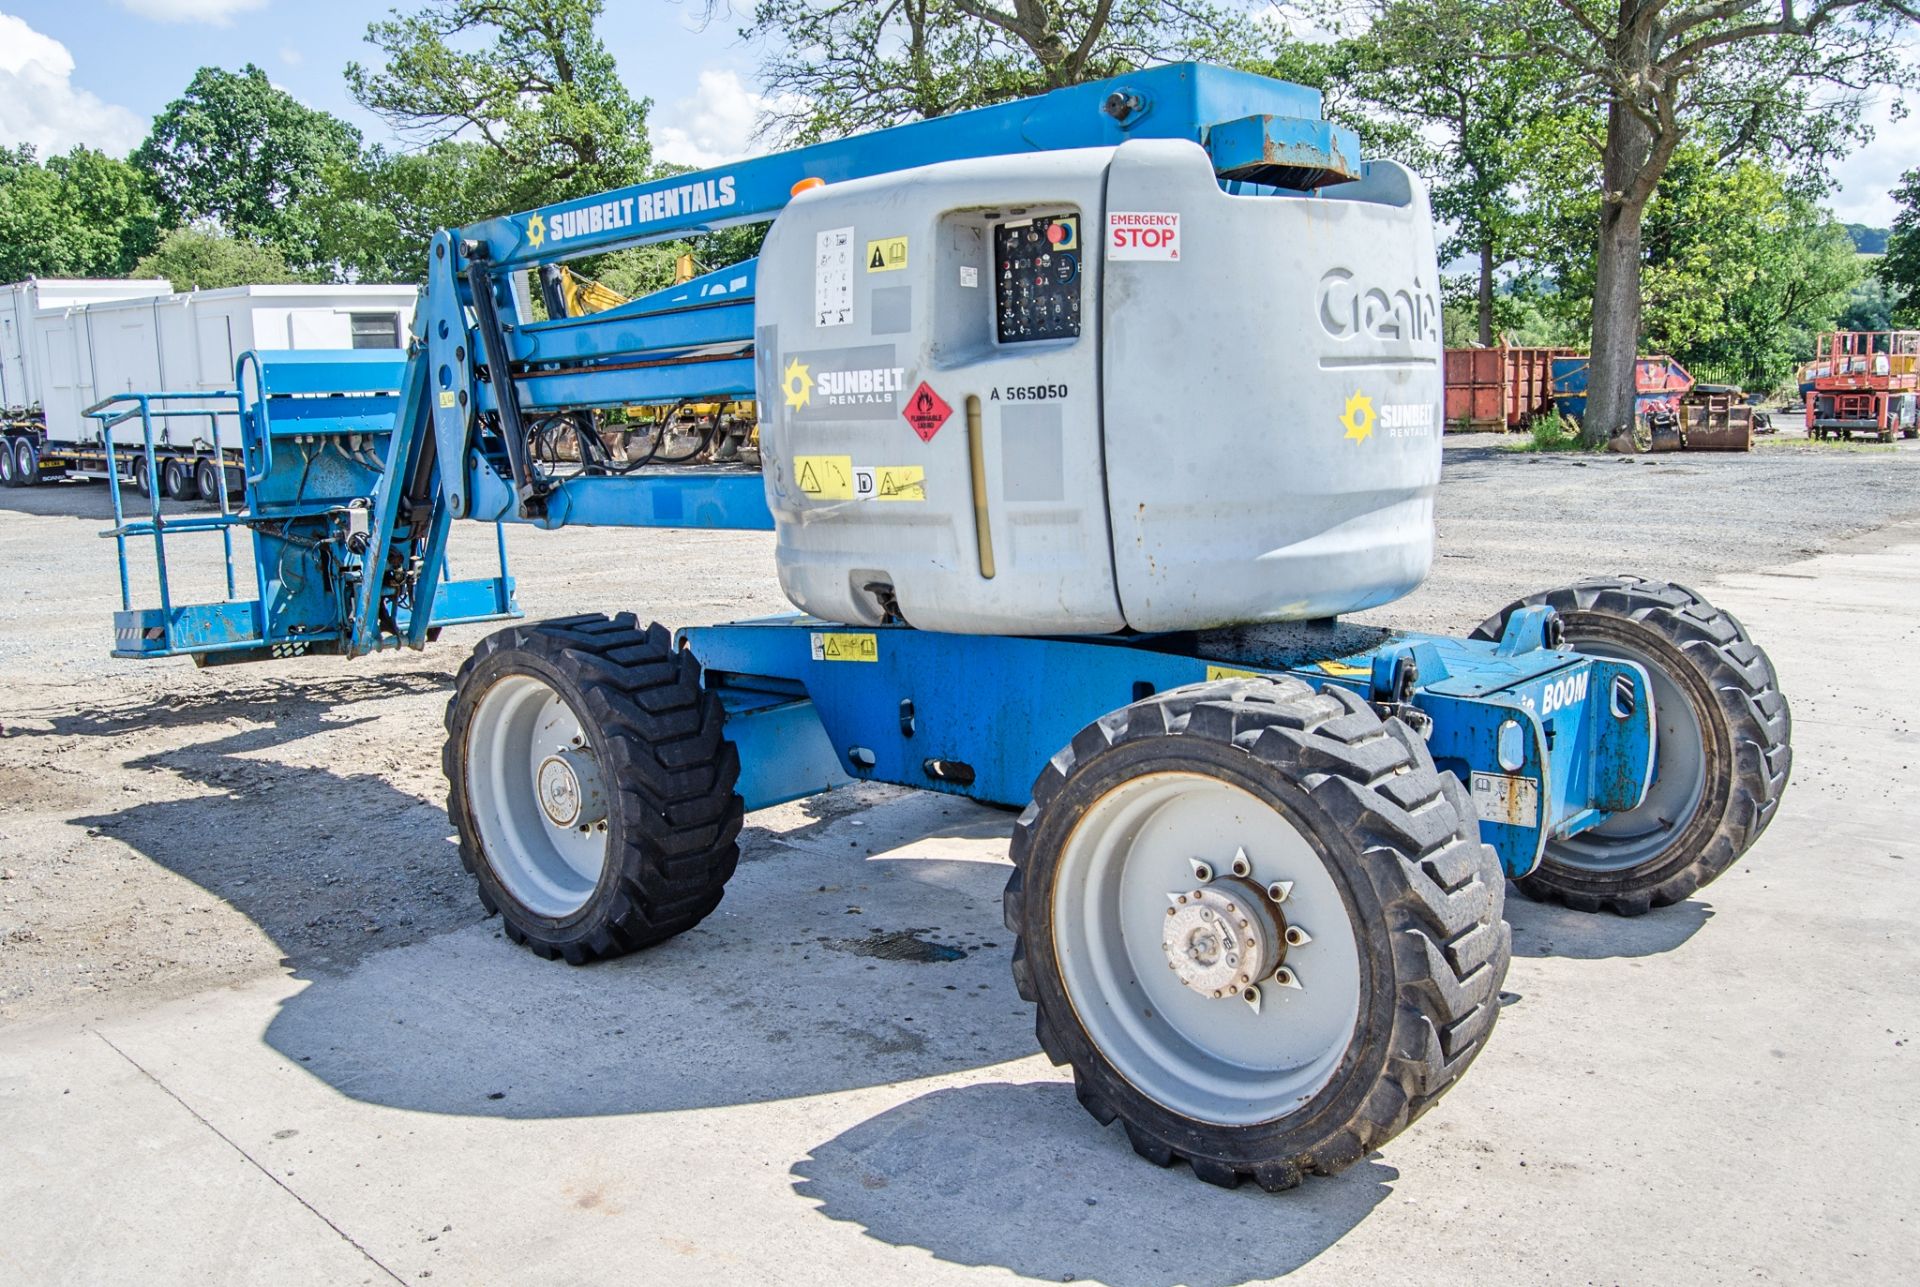 Genie Z-45/25 battery electric/diesel 4WD articulated boom lift Year: 2011 S/N: Z452512B-2013 - Image 4 of 18